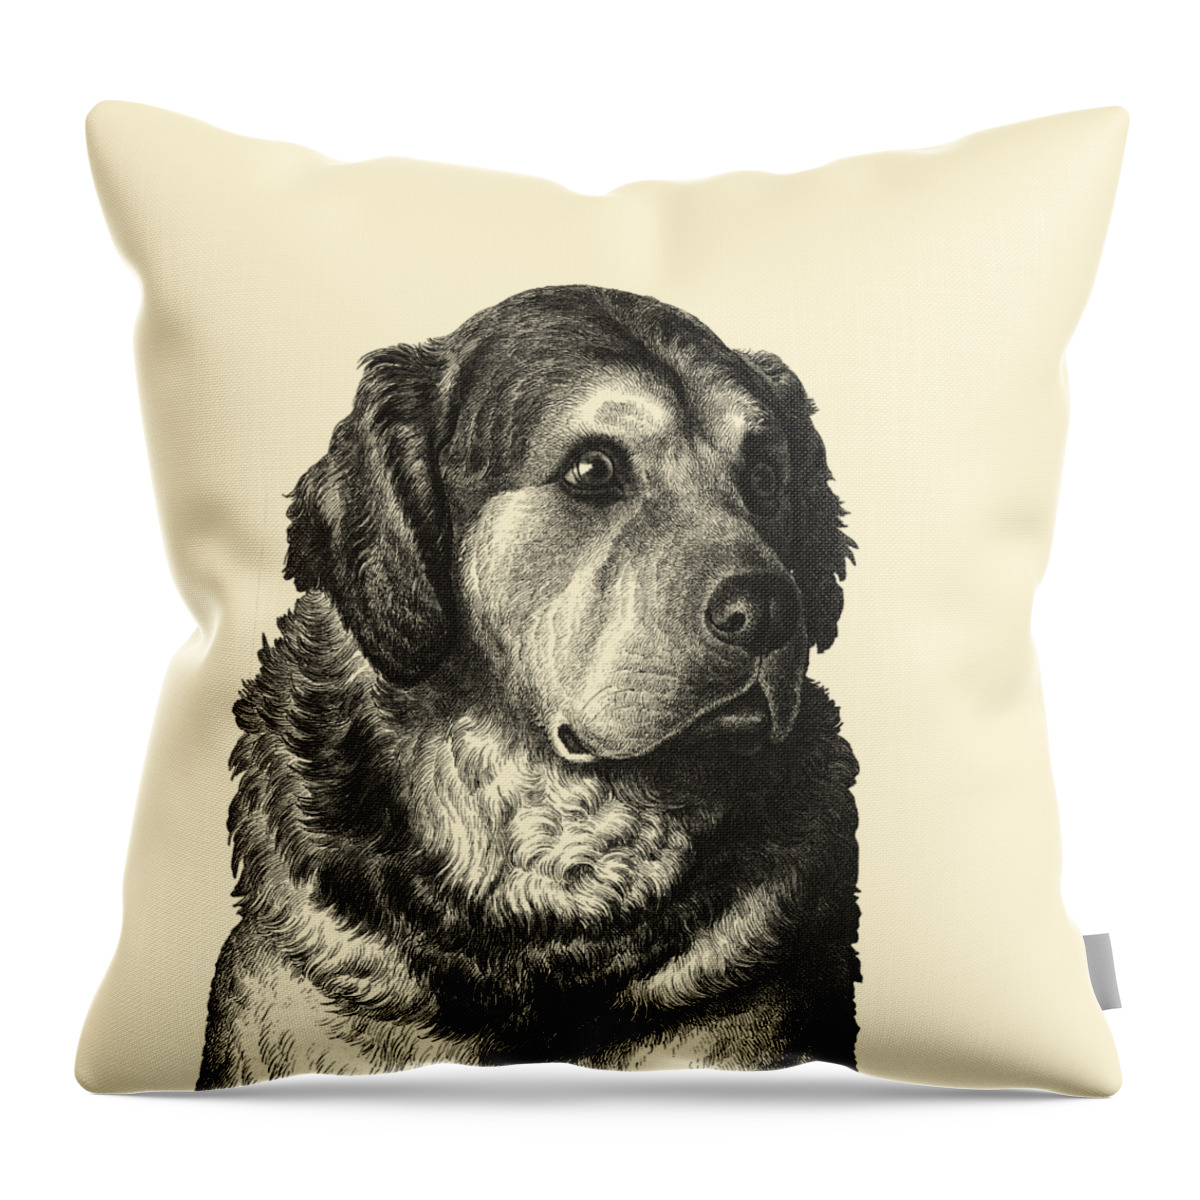 Pyrenean Mountain Dog Throw Pillow featuring the digital art Big Cute Dog Portrait by Madame Memento